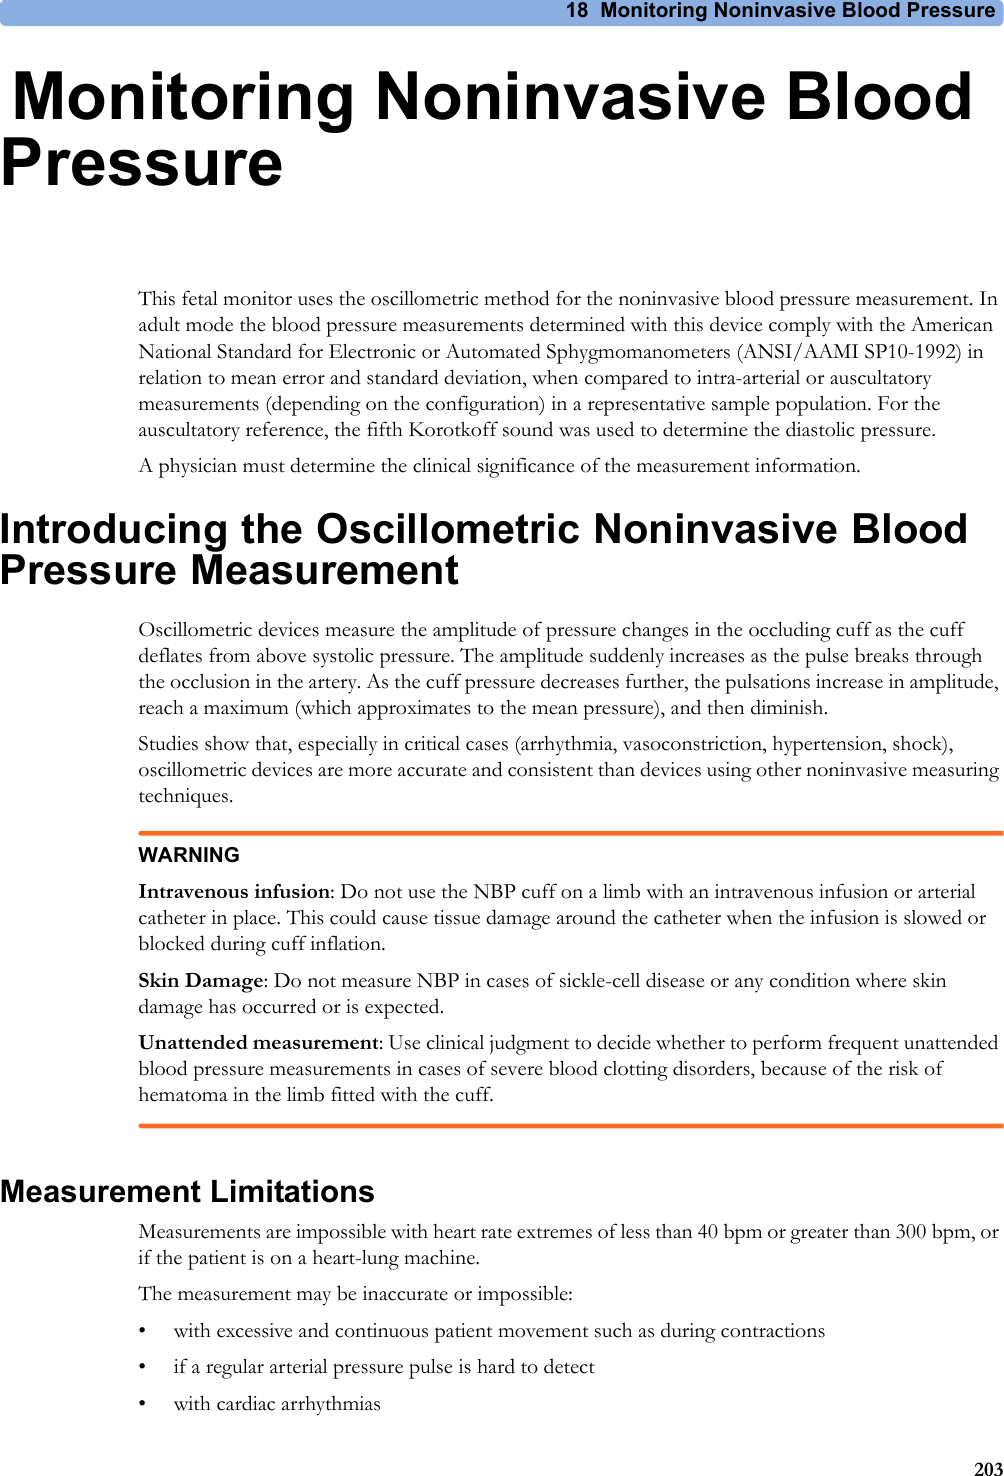 18 Monitoring Noninvasive Blood Pressure20318Monitoring Noninvasive Blood PressureThis fetal monitor uses the oscillometric method for the noninvasive blood pressure measurement. In adult mode the blood pressure measurements determined with this device comply with the American National Standard for Electronic or Automated Sphygmomanometers (ANSI/AAMI SP10-1992) in relation to mean error and standard deviation, when compared to intra-arterial or auscultatory measurements (depending on the configuration) in a representative sample population. For the auscultatory reference, the fifth Korotkoff sound was used to determine the diastolic pressure.A physician must determine the clinical significance of the measurement information.Introducing the Oscillometric Noninvasive Blood Pressure MeasurementOscillometric devices measure the amplitude of pressure changes in the occluding cuff as the cuff deflates from above systolic pressure. The amplitude suddenly increases as the pulse breaks through the occlusion in the artery. As the cuff pressure decreases further, the pulsations increase in amplitude, reach a maximum (which approximates to the mean pressure), and then diminish.Studies show that, especially in critical cases (arrhythmia, vasoconstriction, hypertension, shock), oscillometric devices are more accurate and consistent than devices using other noninvasive measuring techniques.WARNINGIntravenous infusion: Do not use the NBP cuff on a limb with an intravenous infusion or arterial catheter in place. This could cause tissue damage around the catheter when the infusion is slowed or blocked during cuff inflation.Skin Damage: Do not measure NBP in cases of sickle-cell disease or any condition where skin damage has occurred or is expected.Unattended measurement: Use clinical judgment to decide whether to perform frequent unattended blood pressure measurements in cases of severe blood clotting disorders, because of the risk of hematoma in the limb fitted with the cuff.Measurement LimitationsMeasurements are impossible with heart rate extremes of less than 40 bpm or greater than 300 bpm, or if the patient is on a heart-lung machine.The measurement may be inaccurate or impossible:• with excessive and continuous patient movement such as during contractions• if a regular arterial pressure pulse is hard to detect• with cardiac arrhythmias